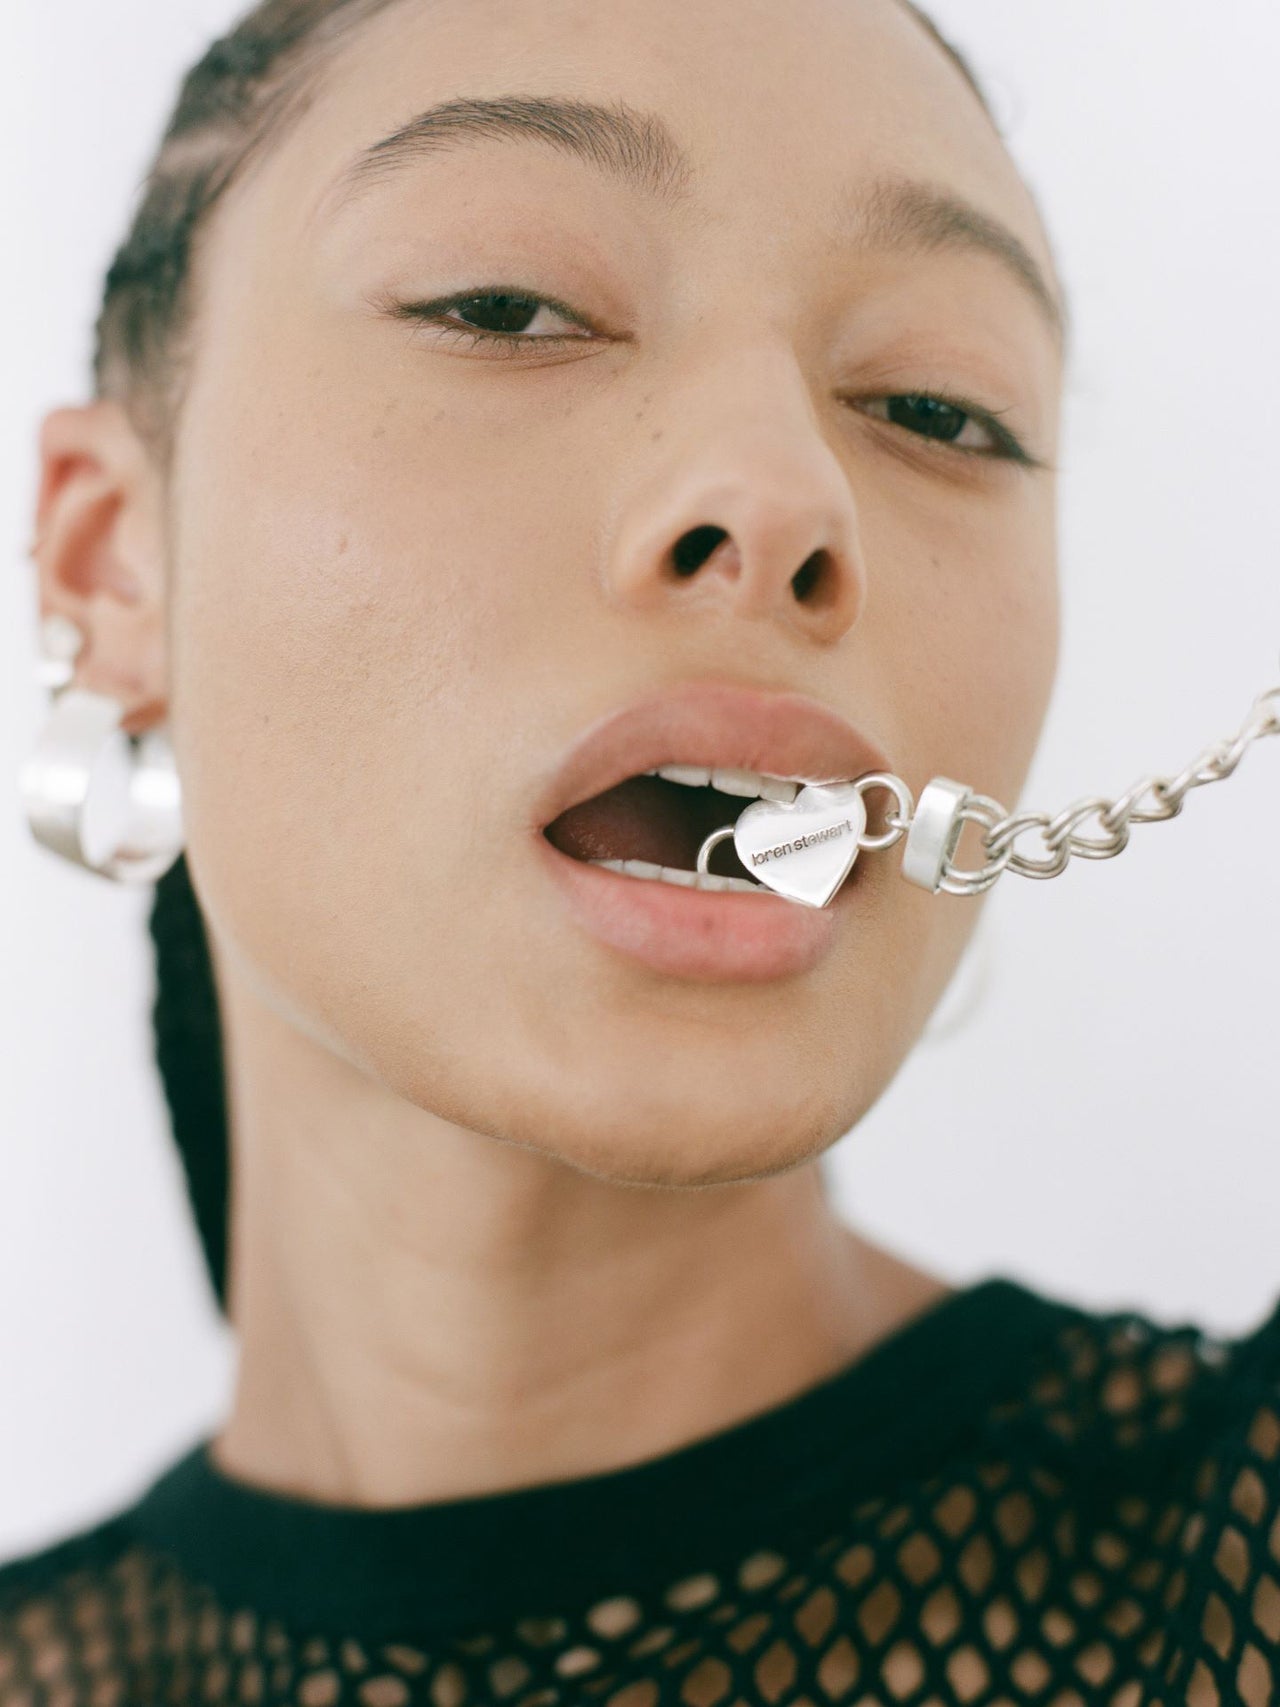 Sterling Silver Double Link Chain Necklace with Amore Heart closure pictured in models mouth. Light grey background.